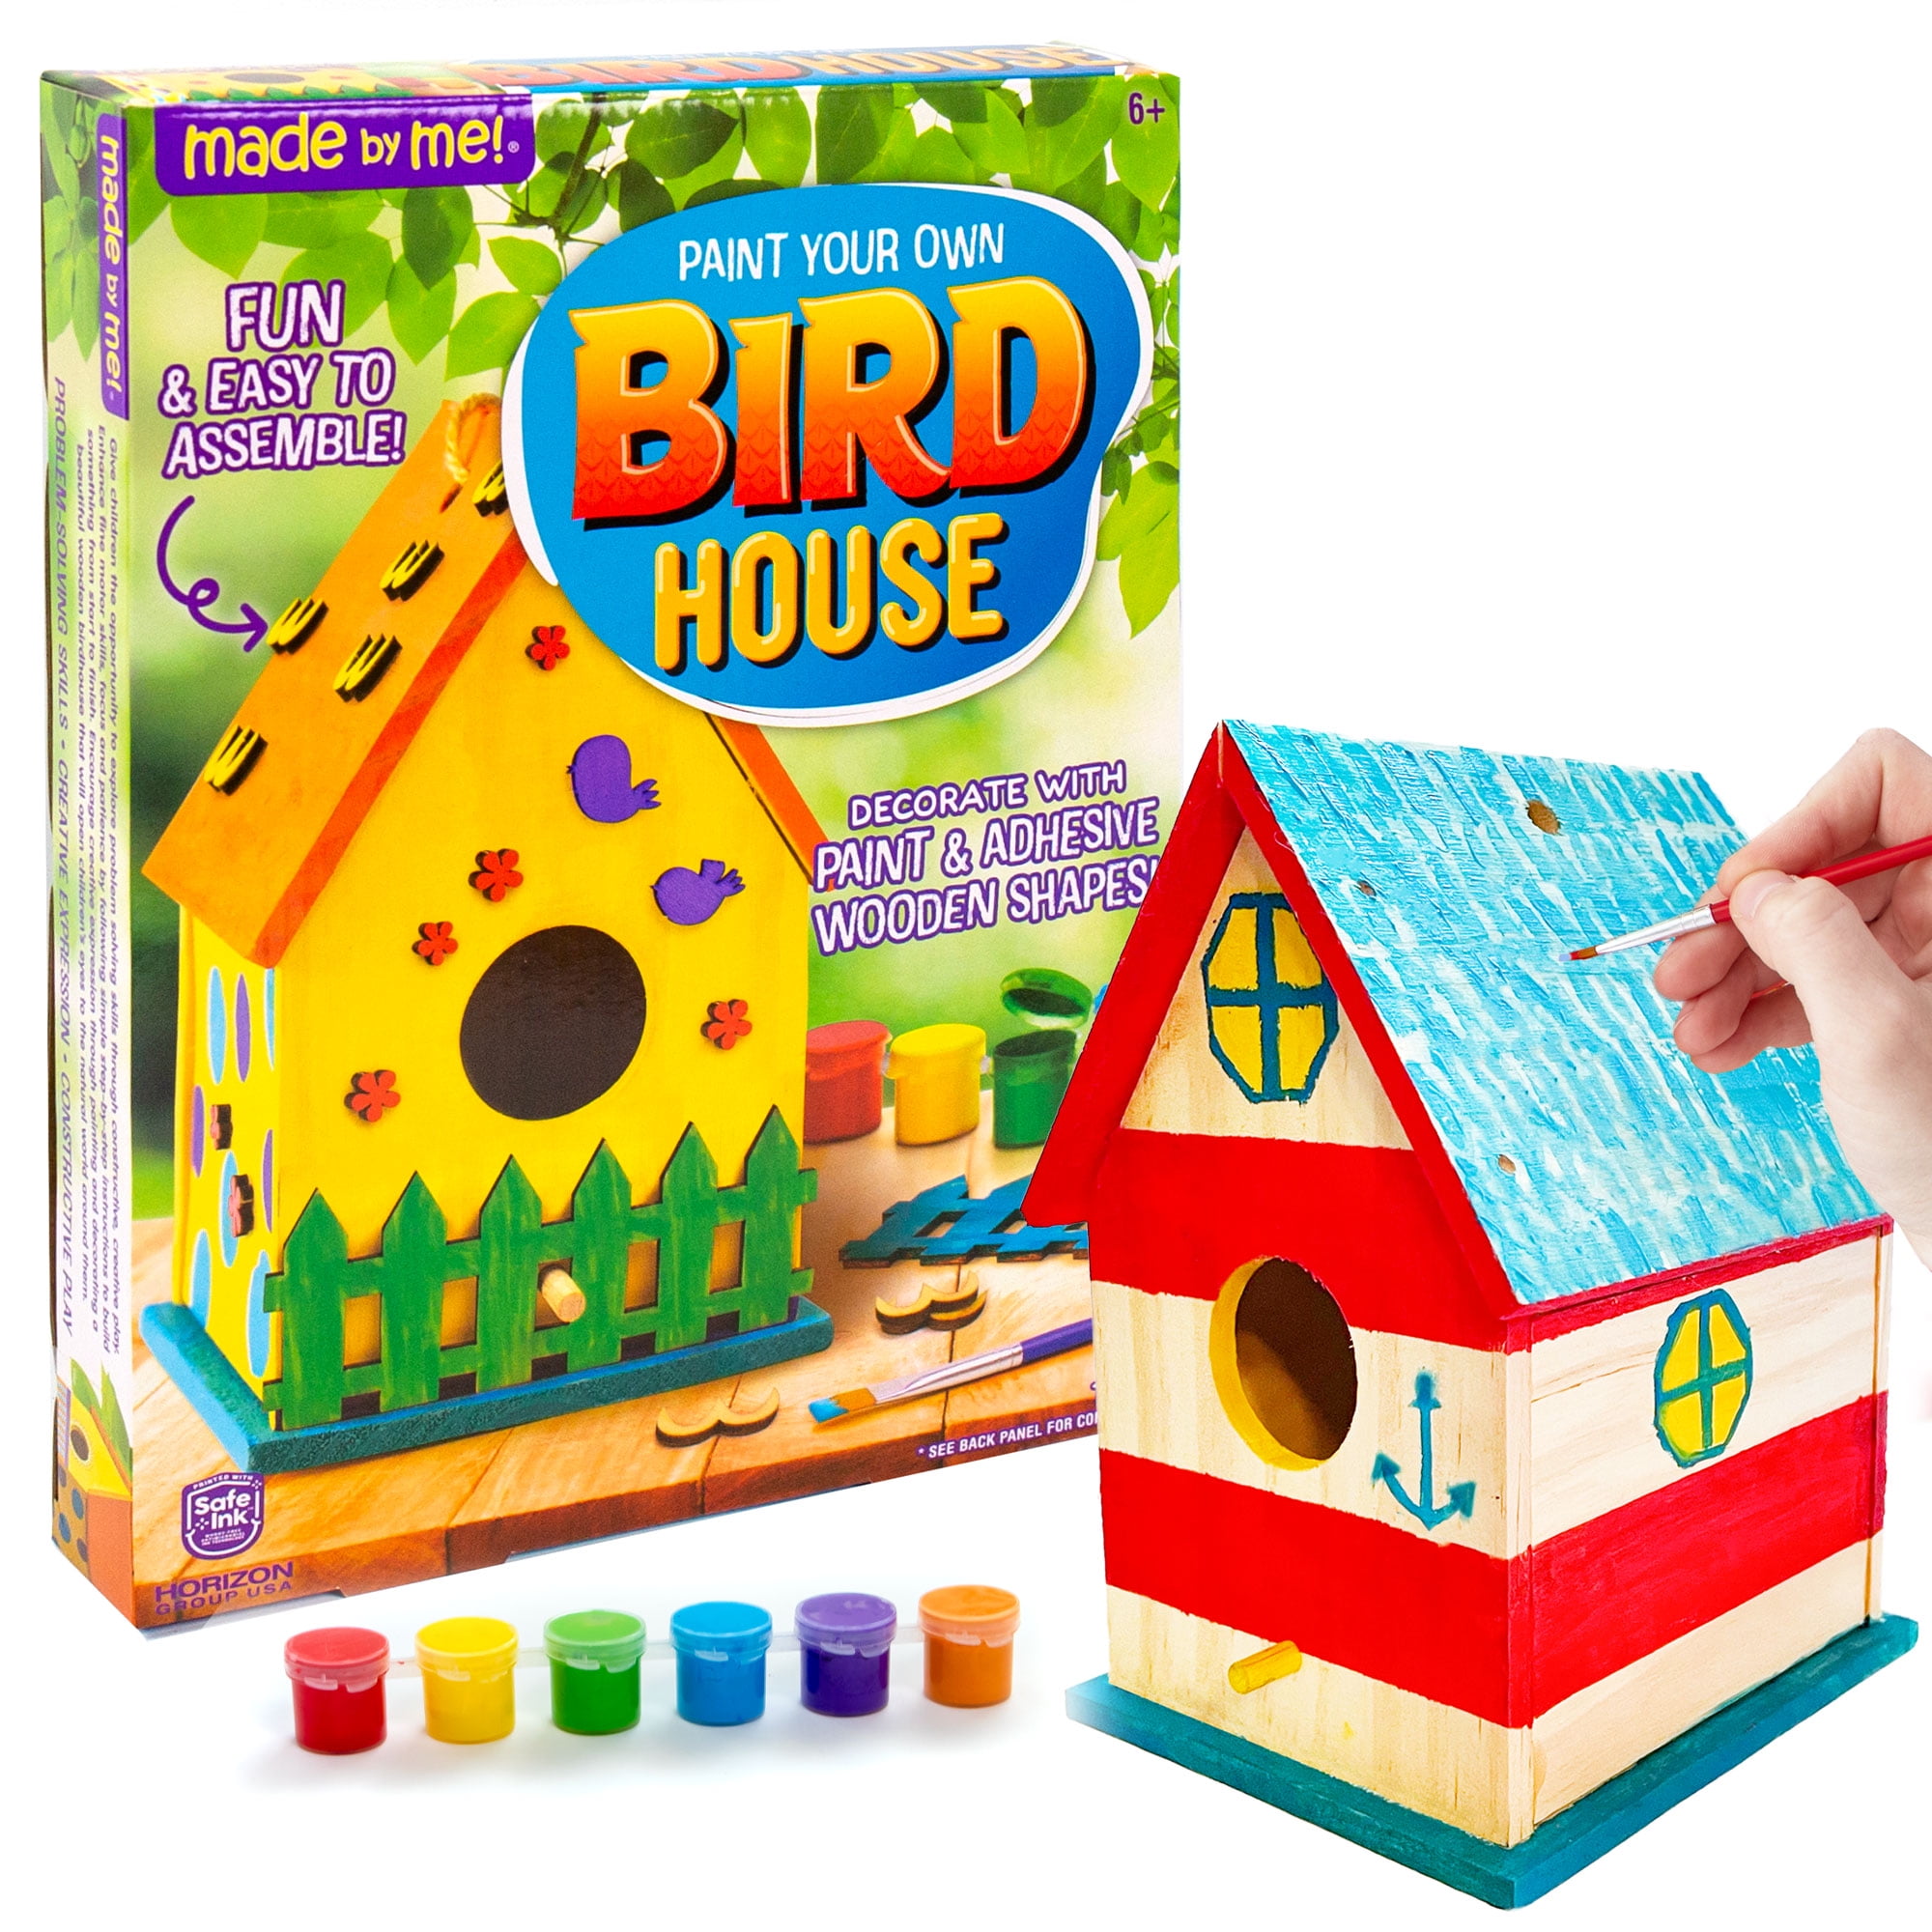 Made by Me Paint Your Own Birdhouse Kit